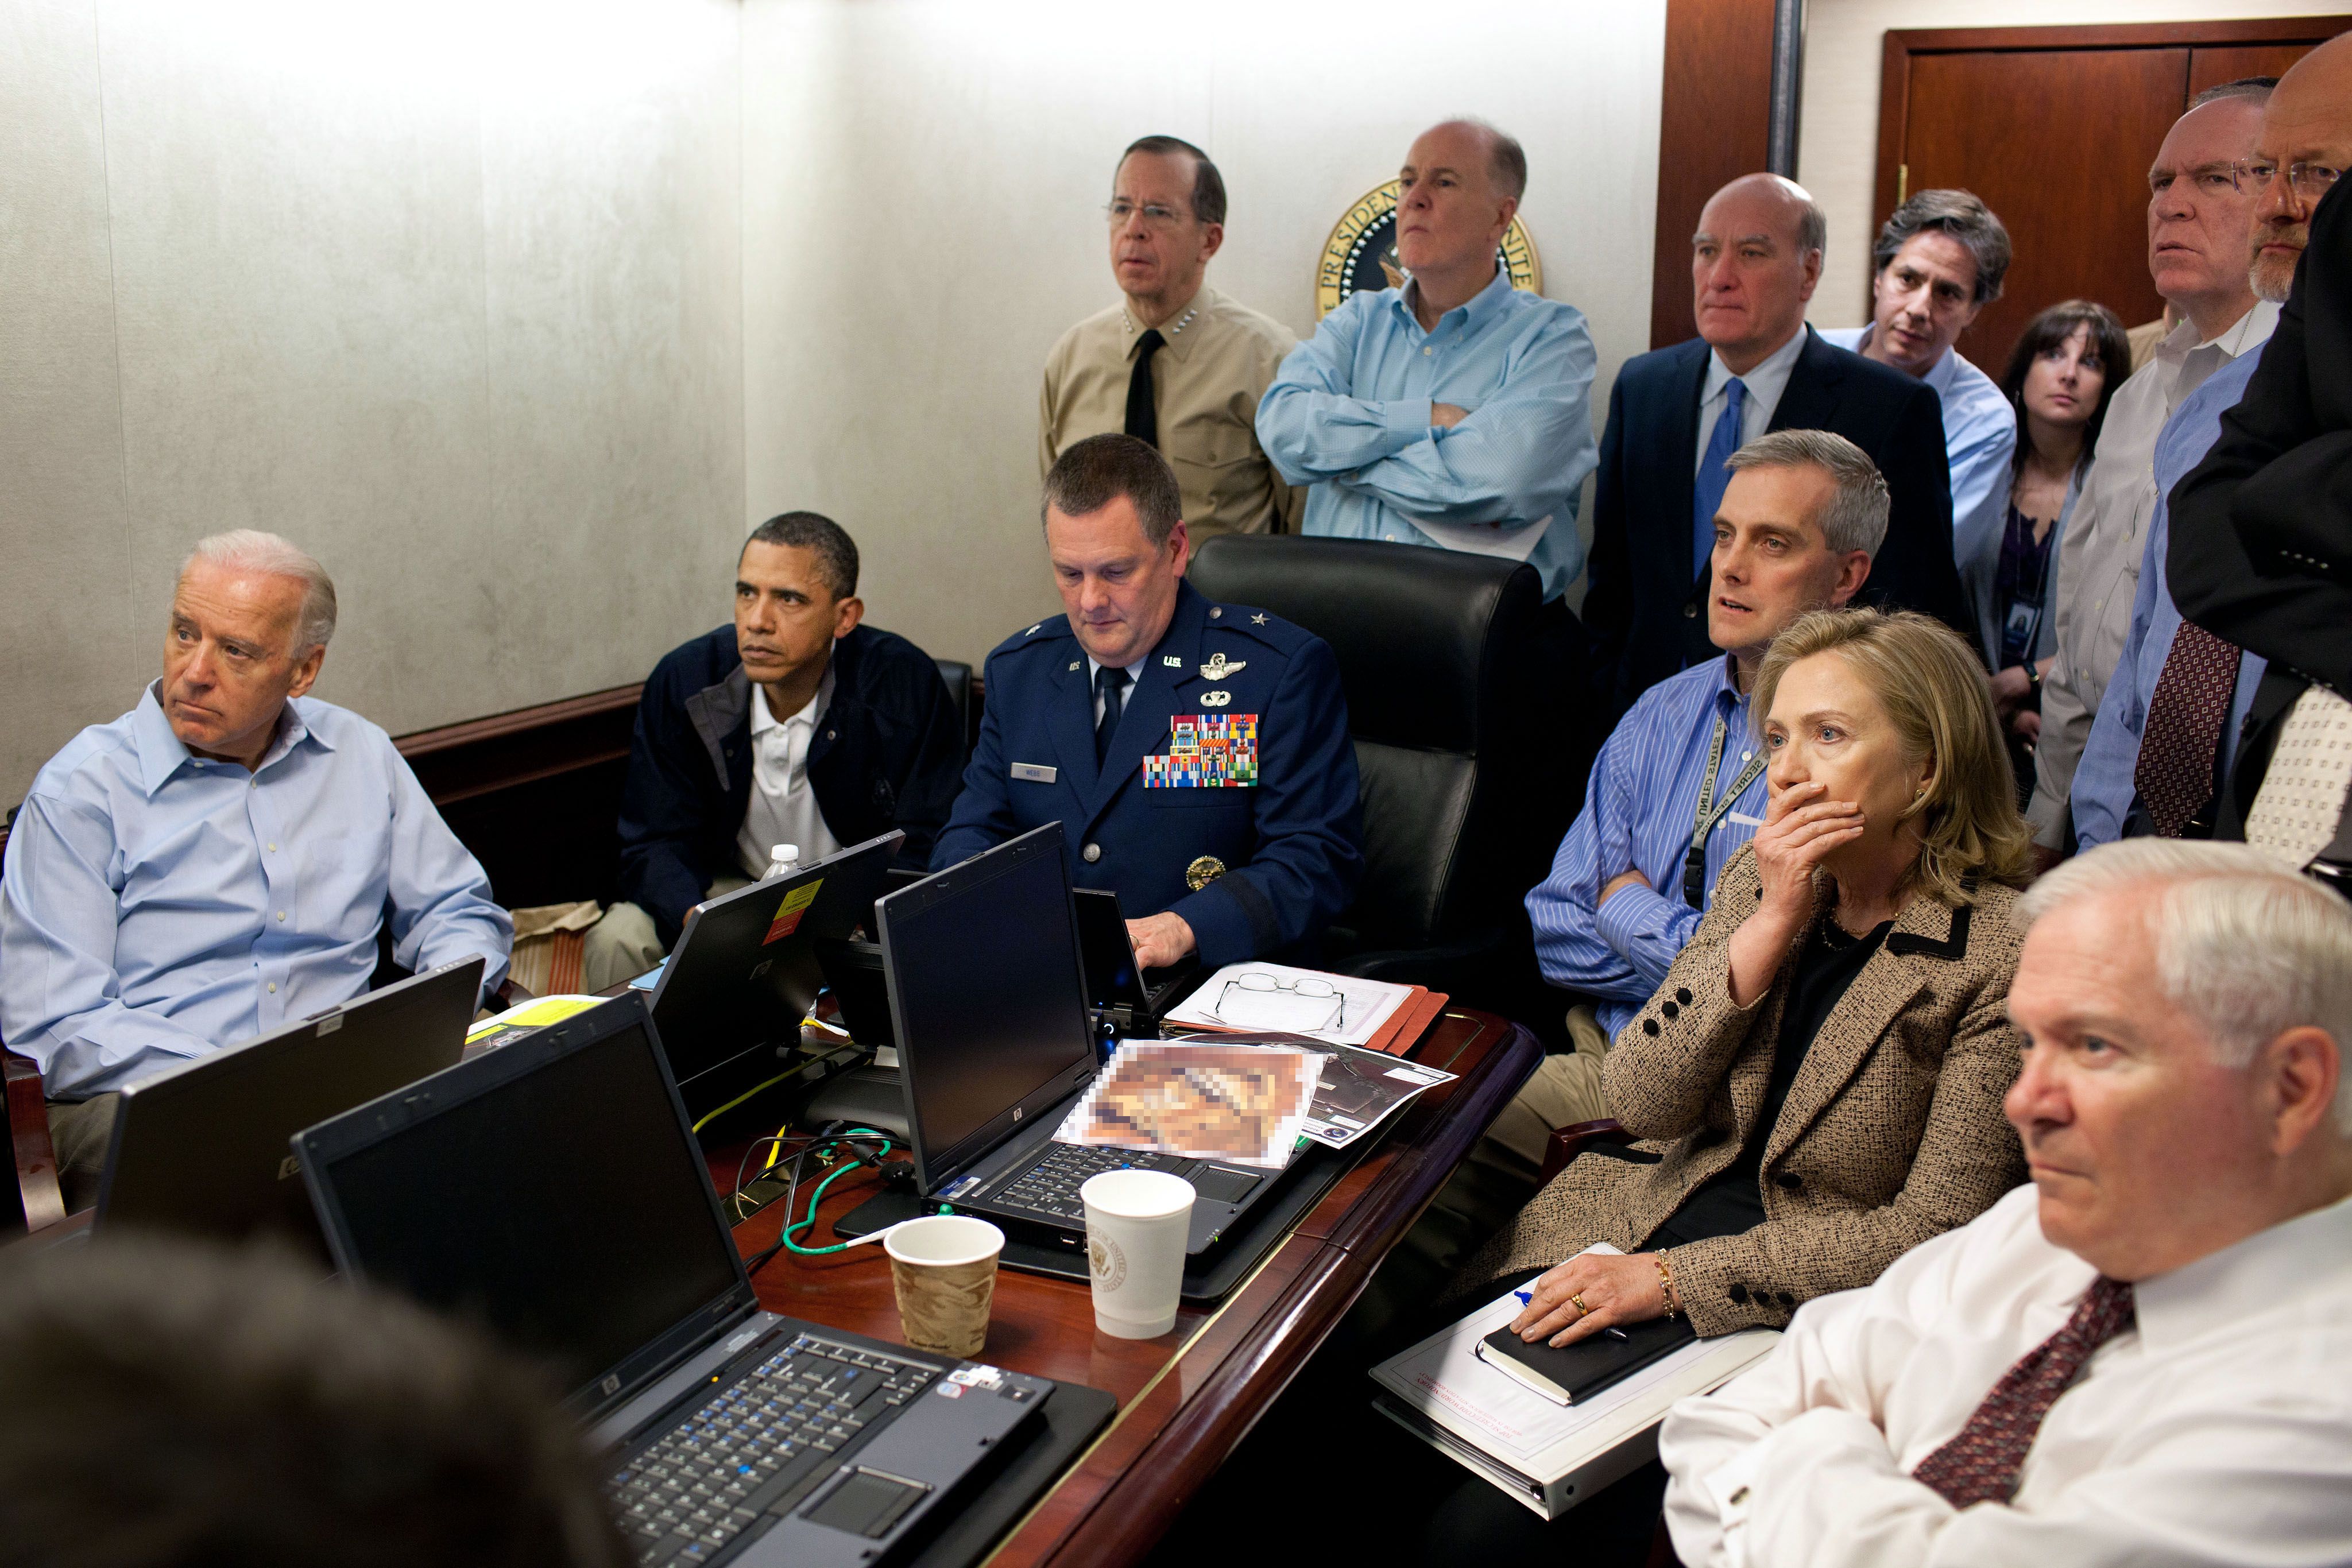  President Barack Obama, members of the national security team and others receive an update on the mission against Osama bin Laden  in Washington, DC